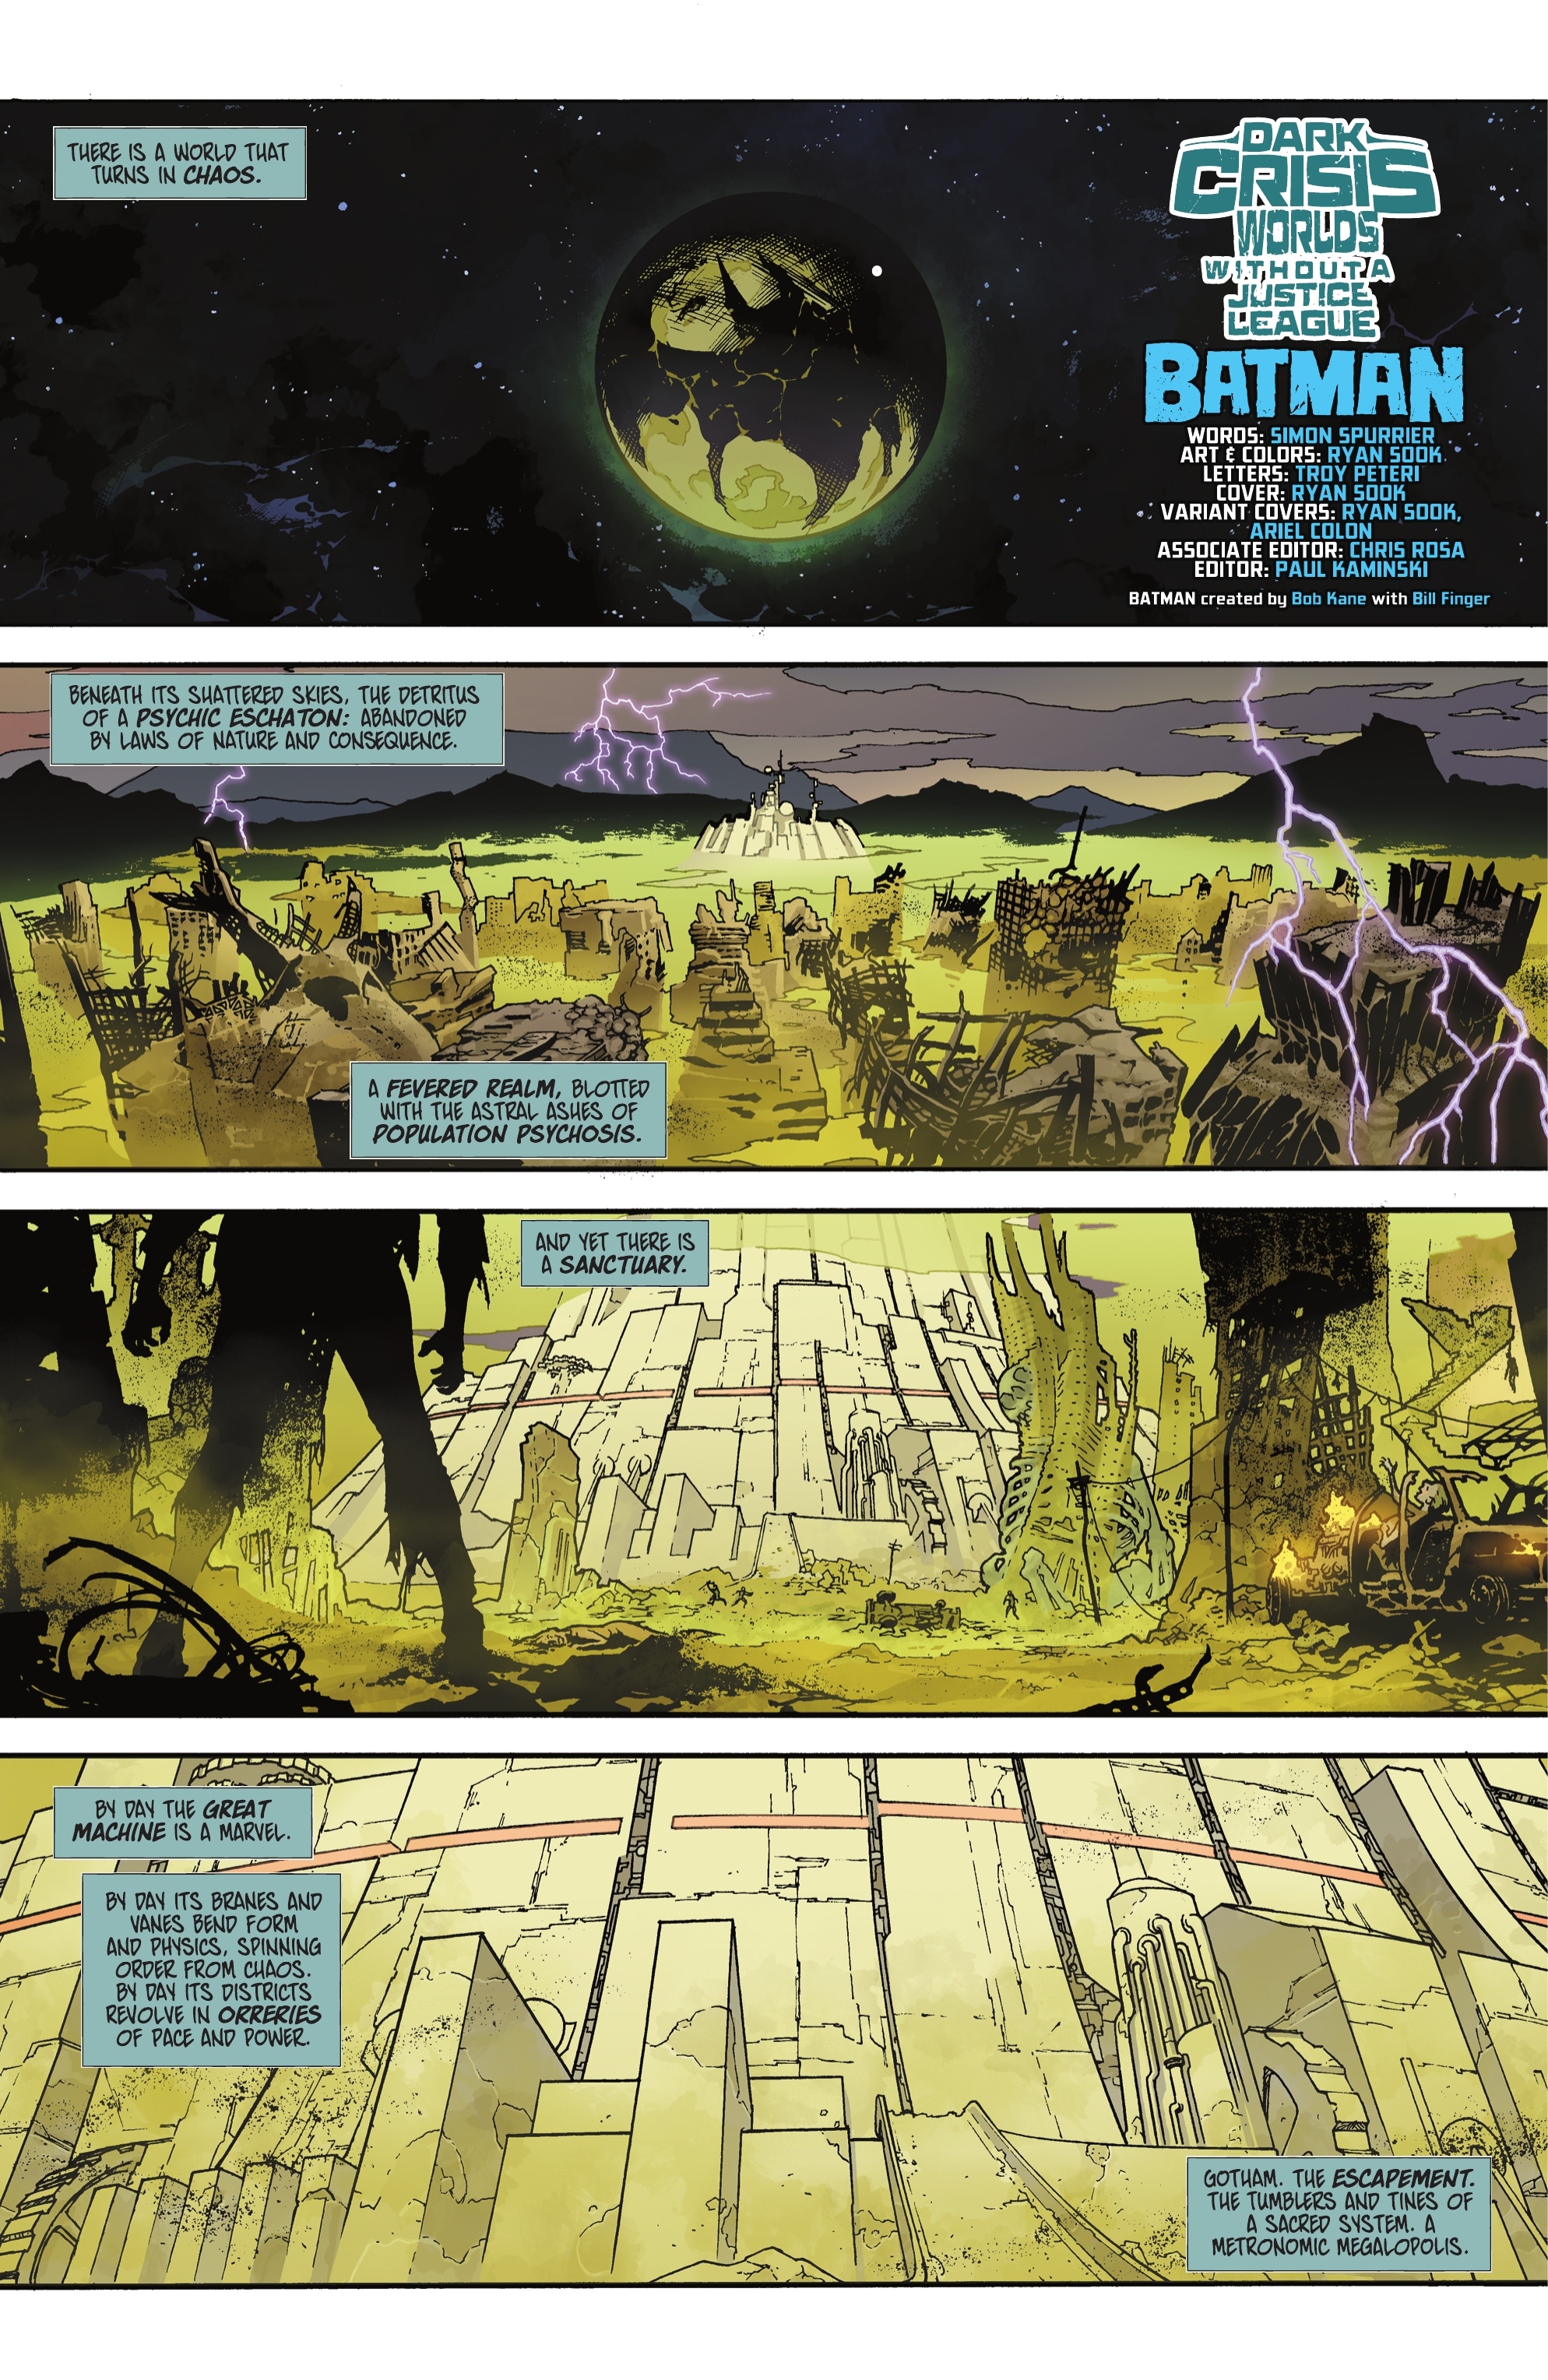 Dark Crisis: Worlds Without a Justice League - Batman (2022-): Chapter 1 - Page 3